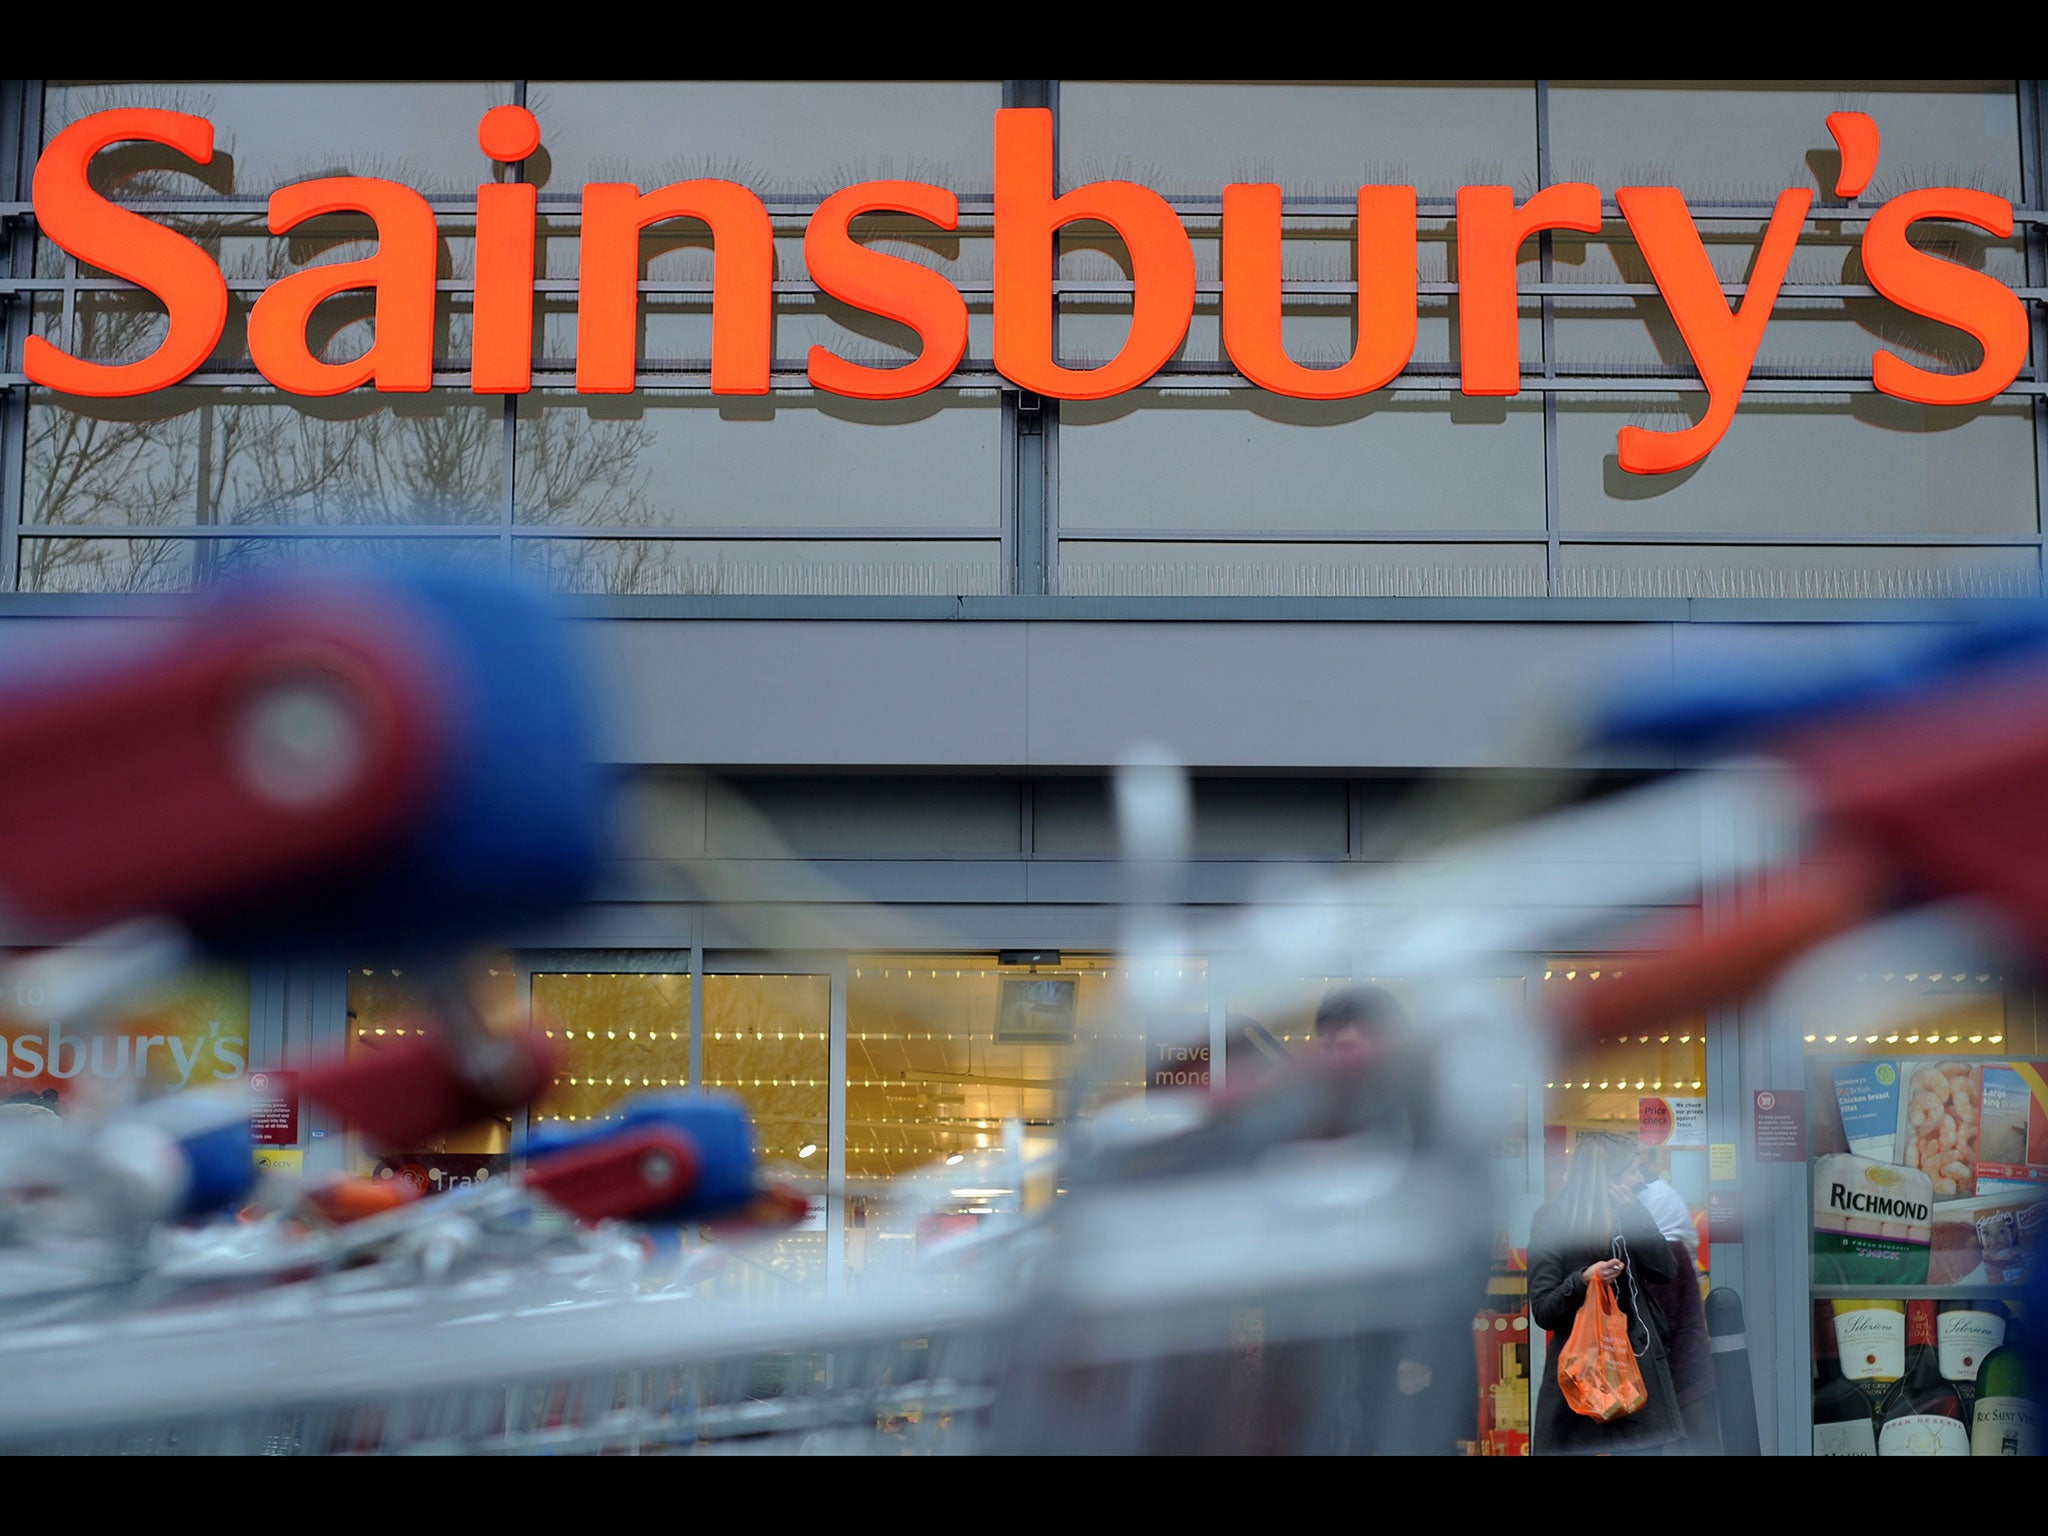 Sainsbury's, which reported its first loss in a decade last month, has already outlined steps it will take to adapt to the new shape of the industry